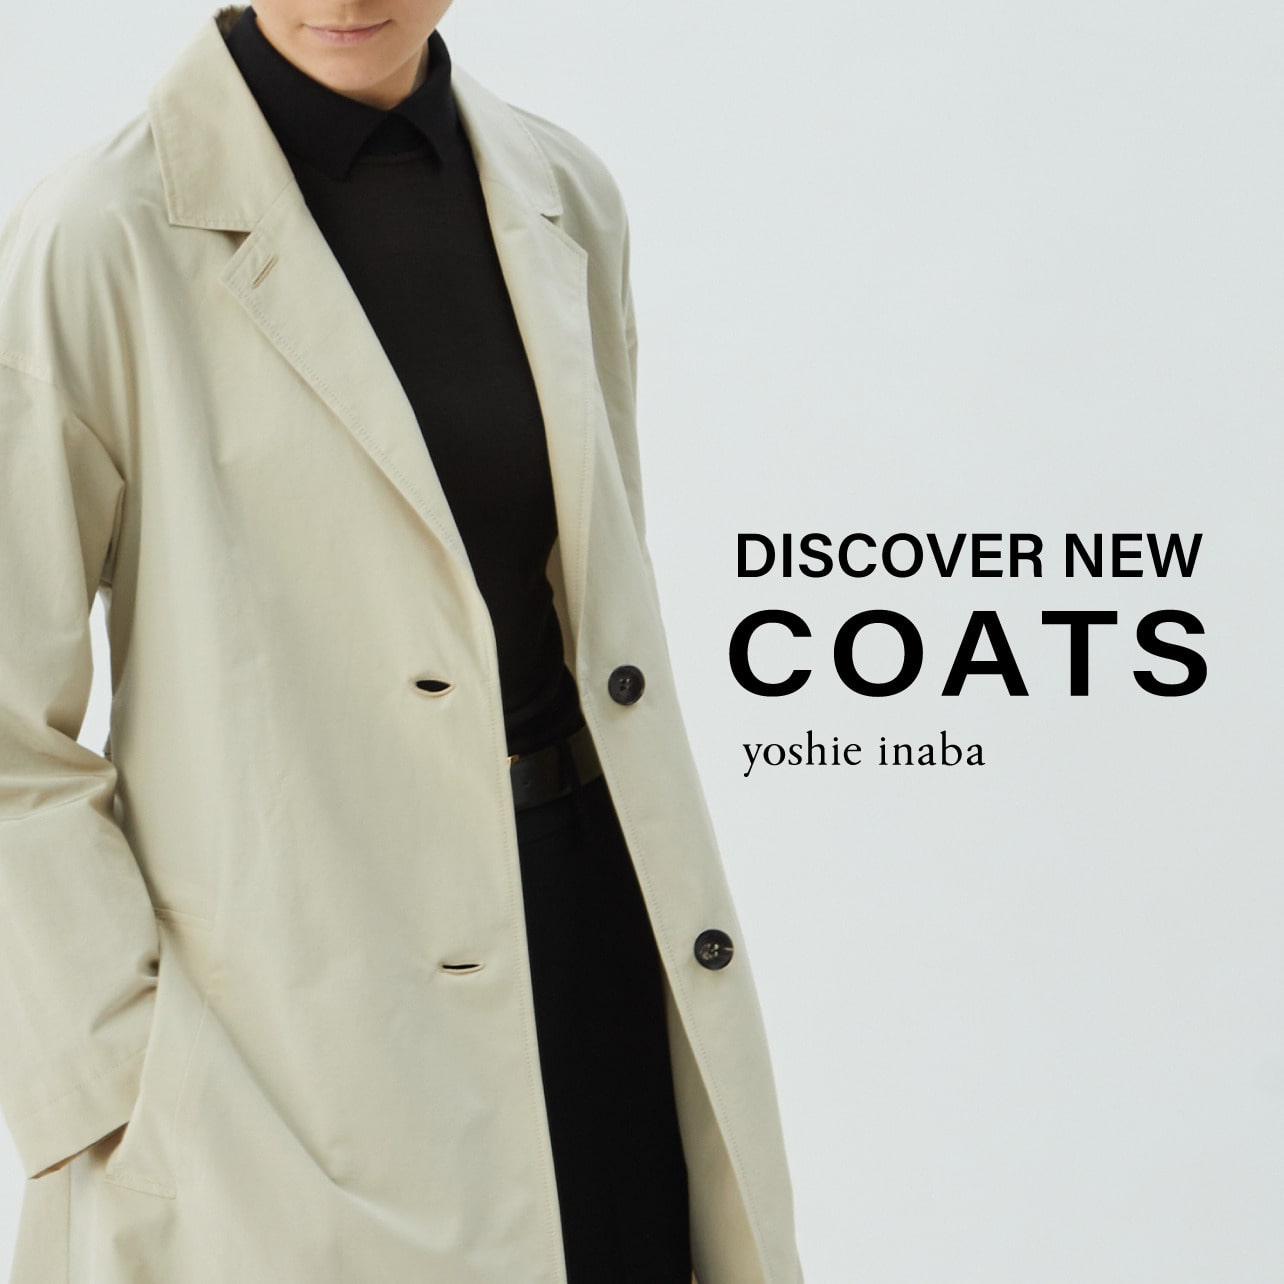 DISCOVER NEW COATS